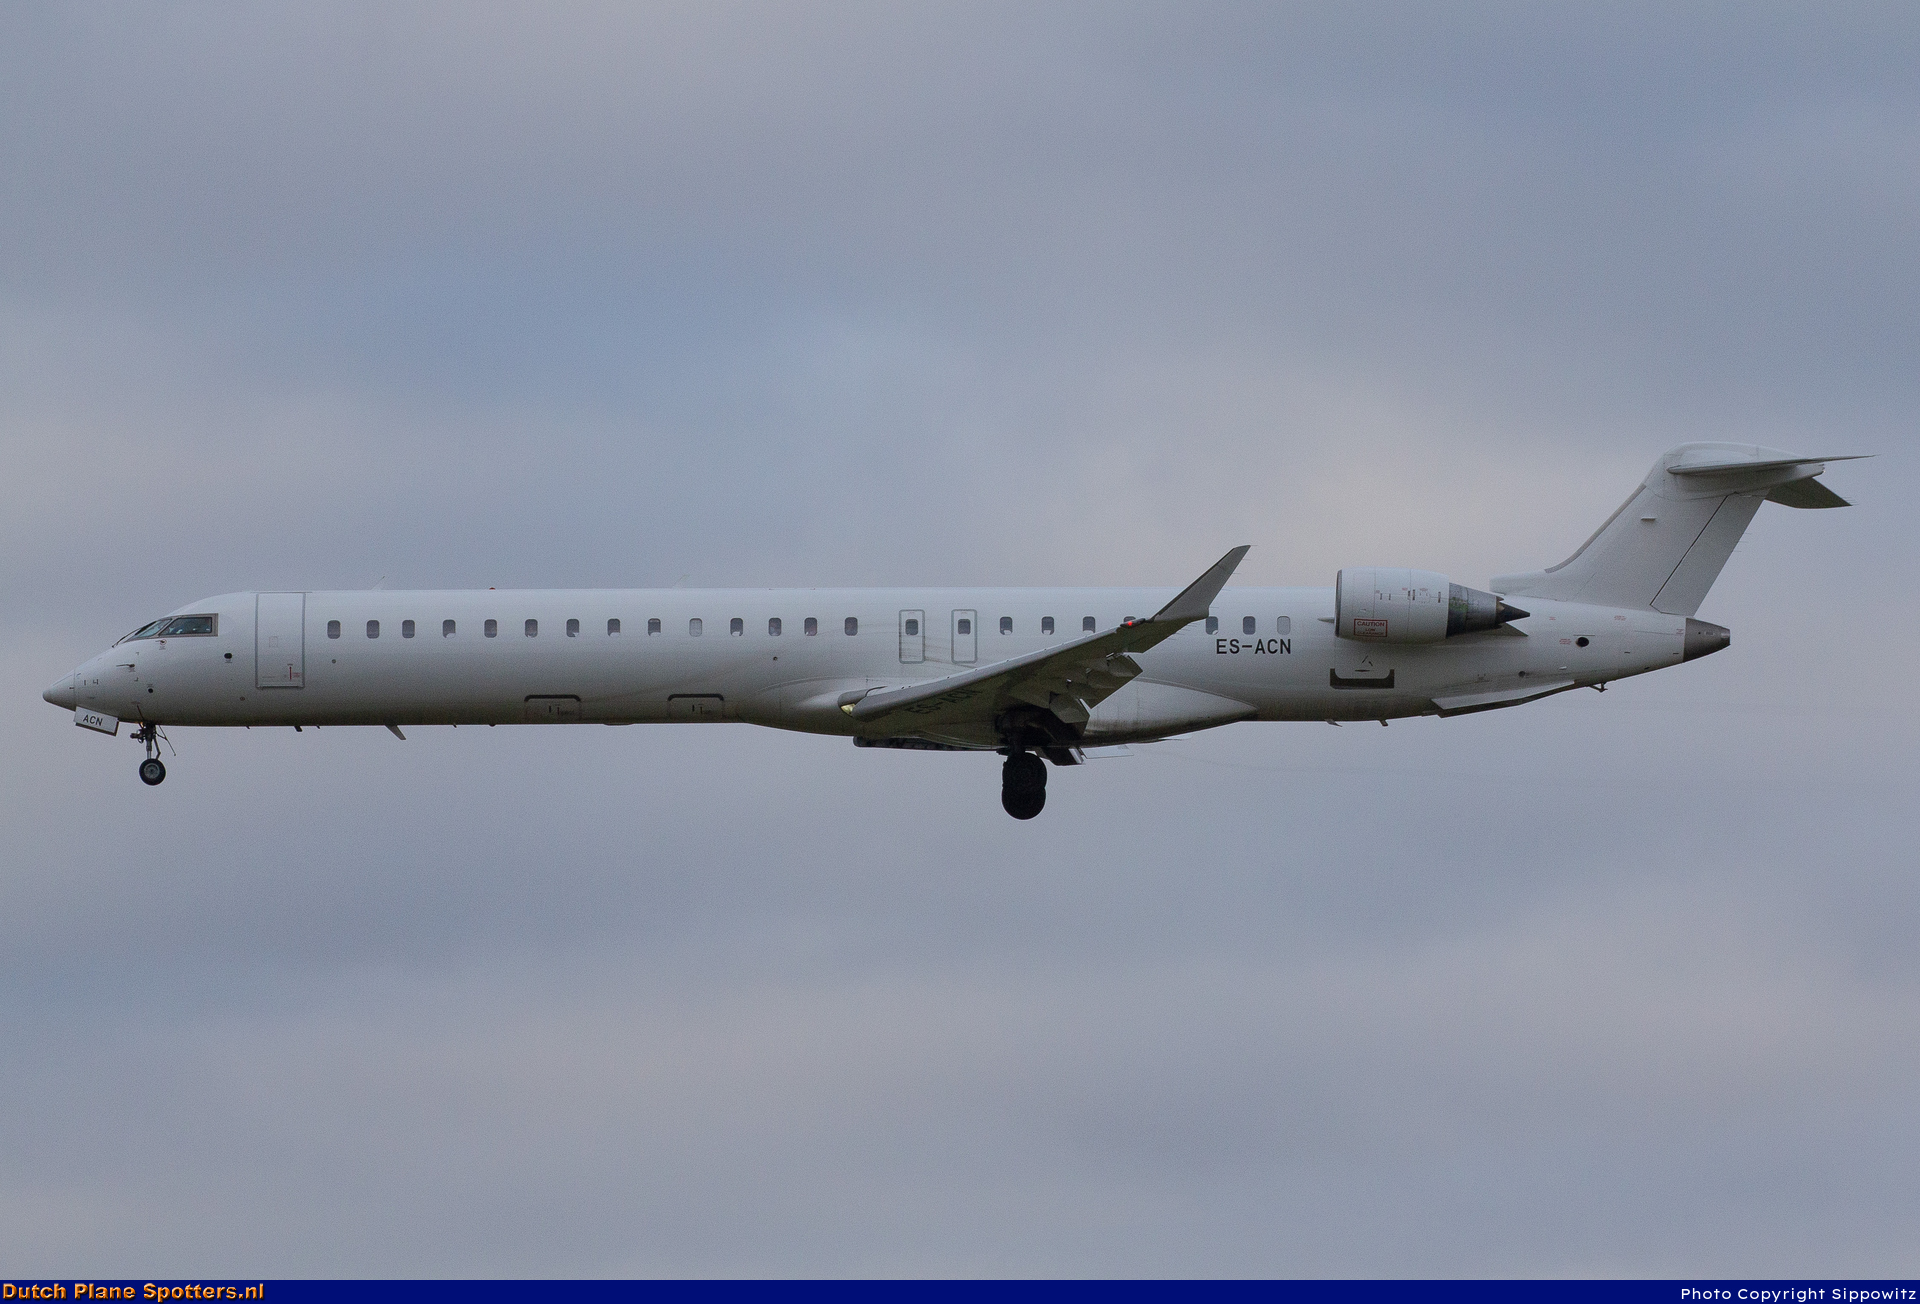 ES-ACN Bombardier Canadair CRJ900 Xfly (SAS Scandinavian Airlines) by Sippowitz